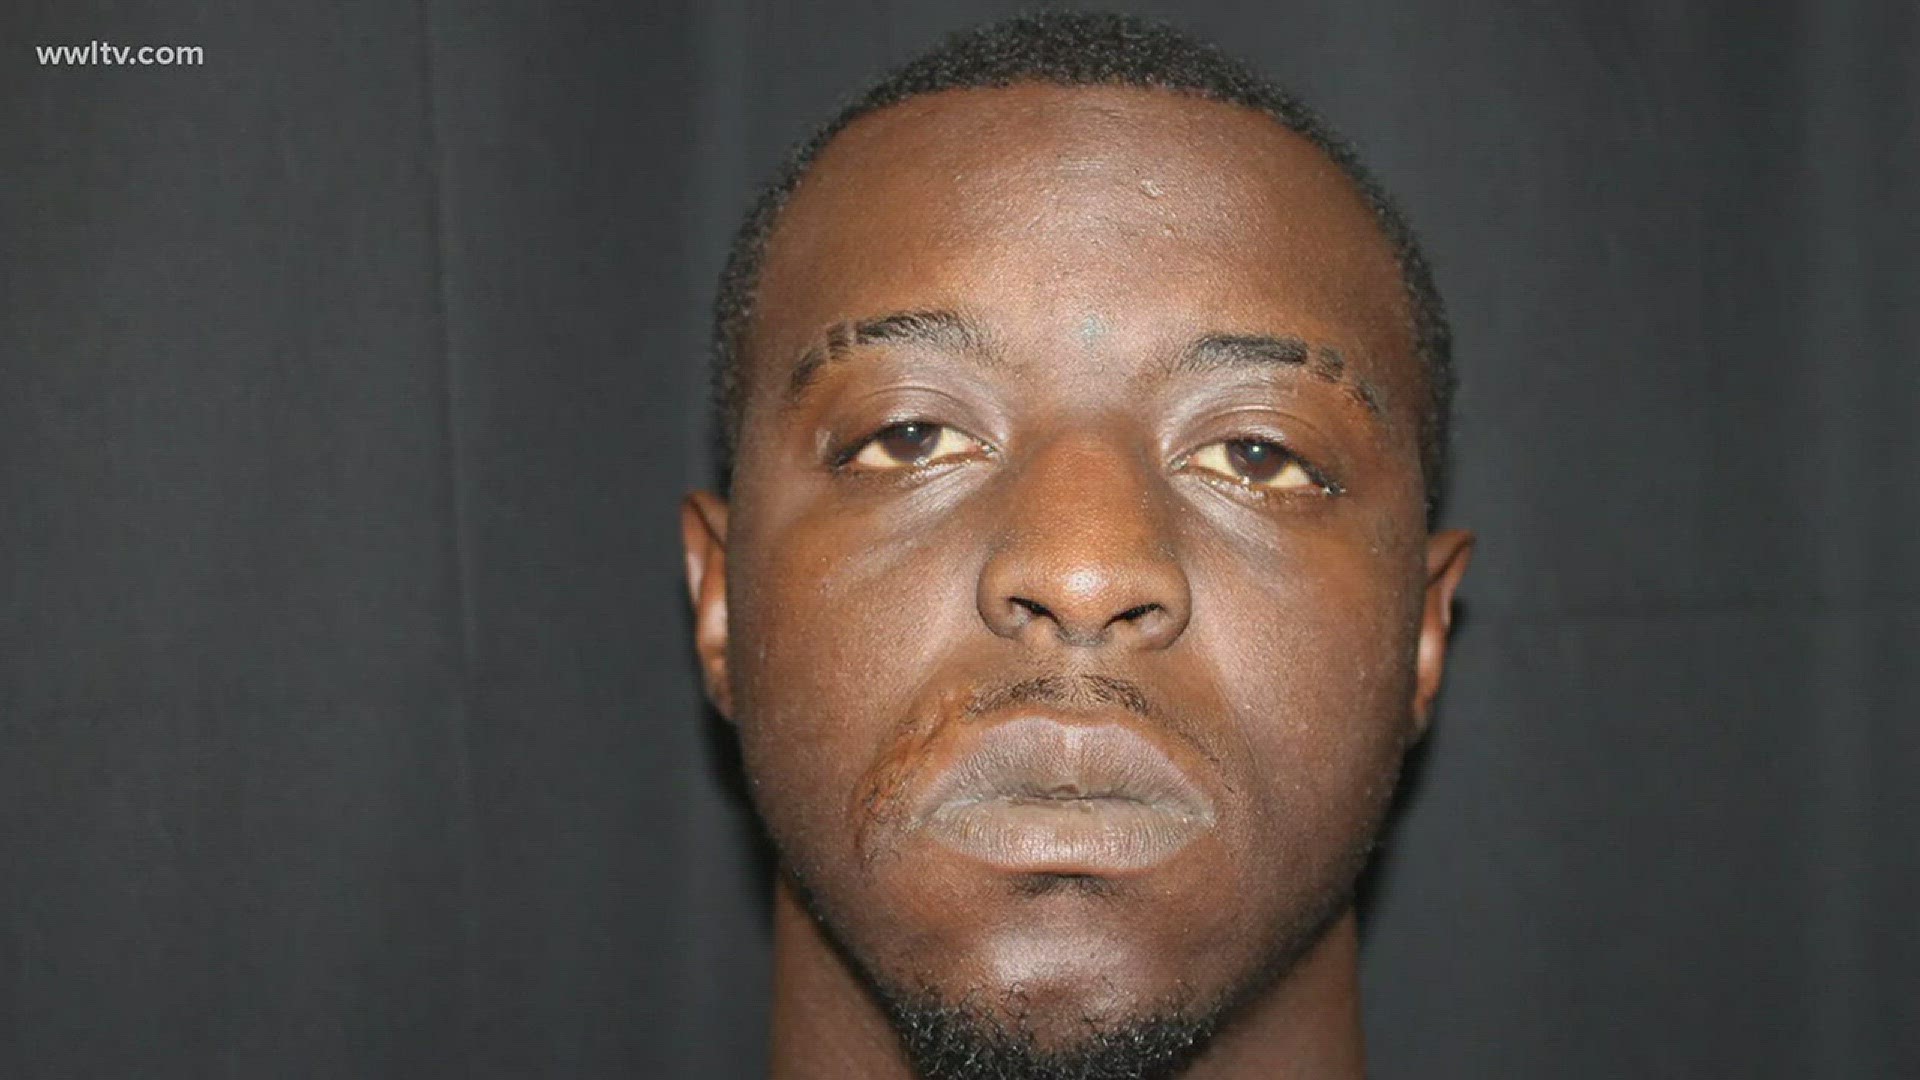 A man who was released from prison early just a week ago has been arrested for armed robbery in Kenner.